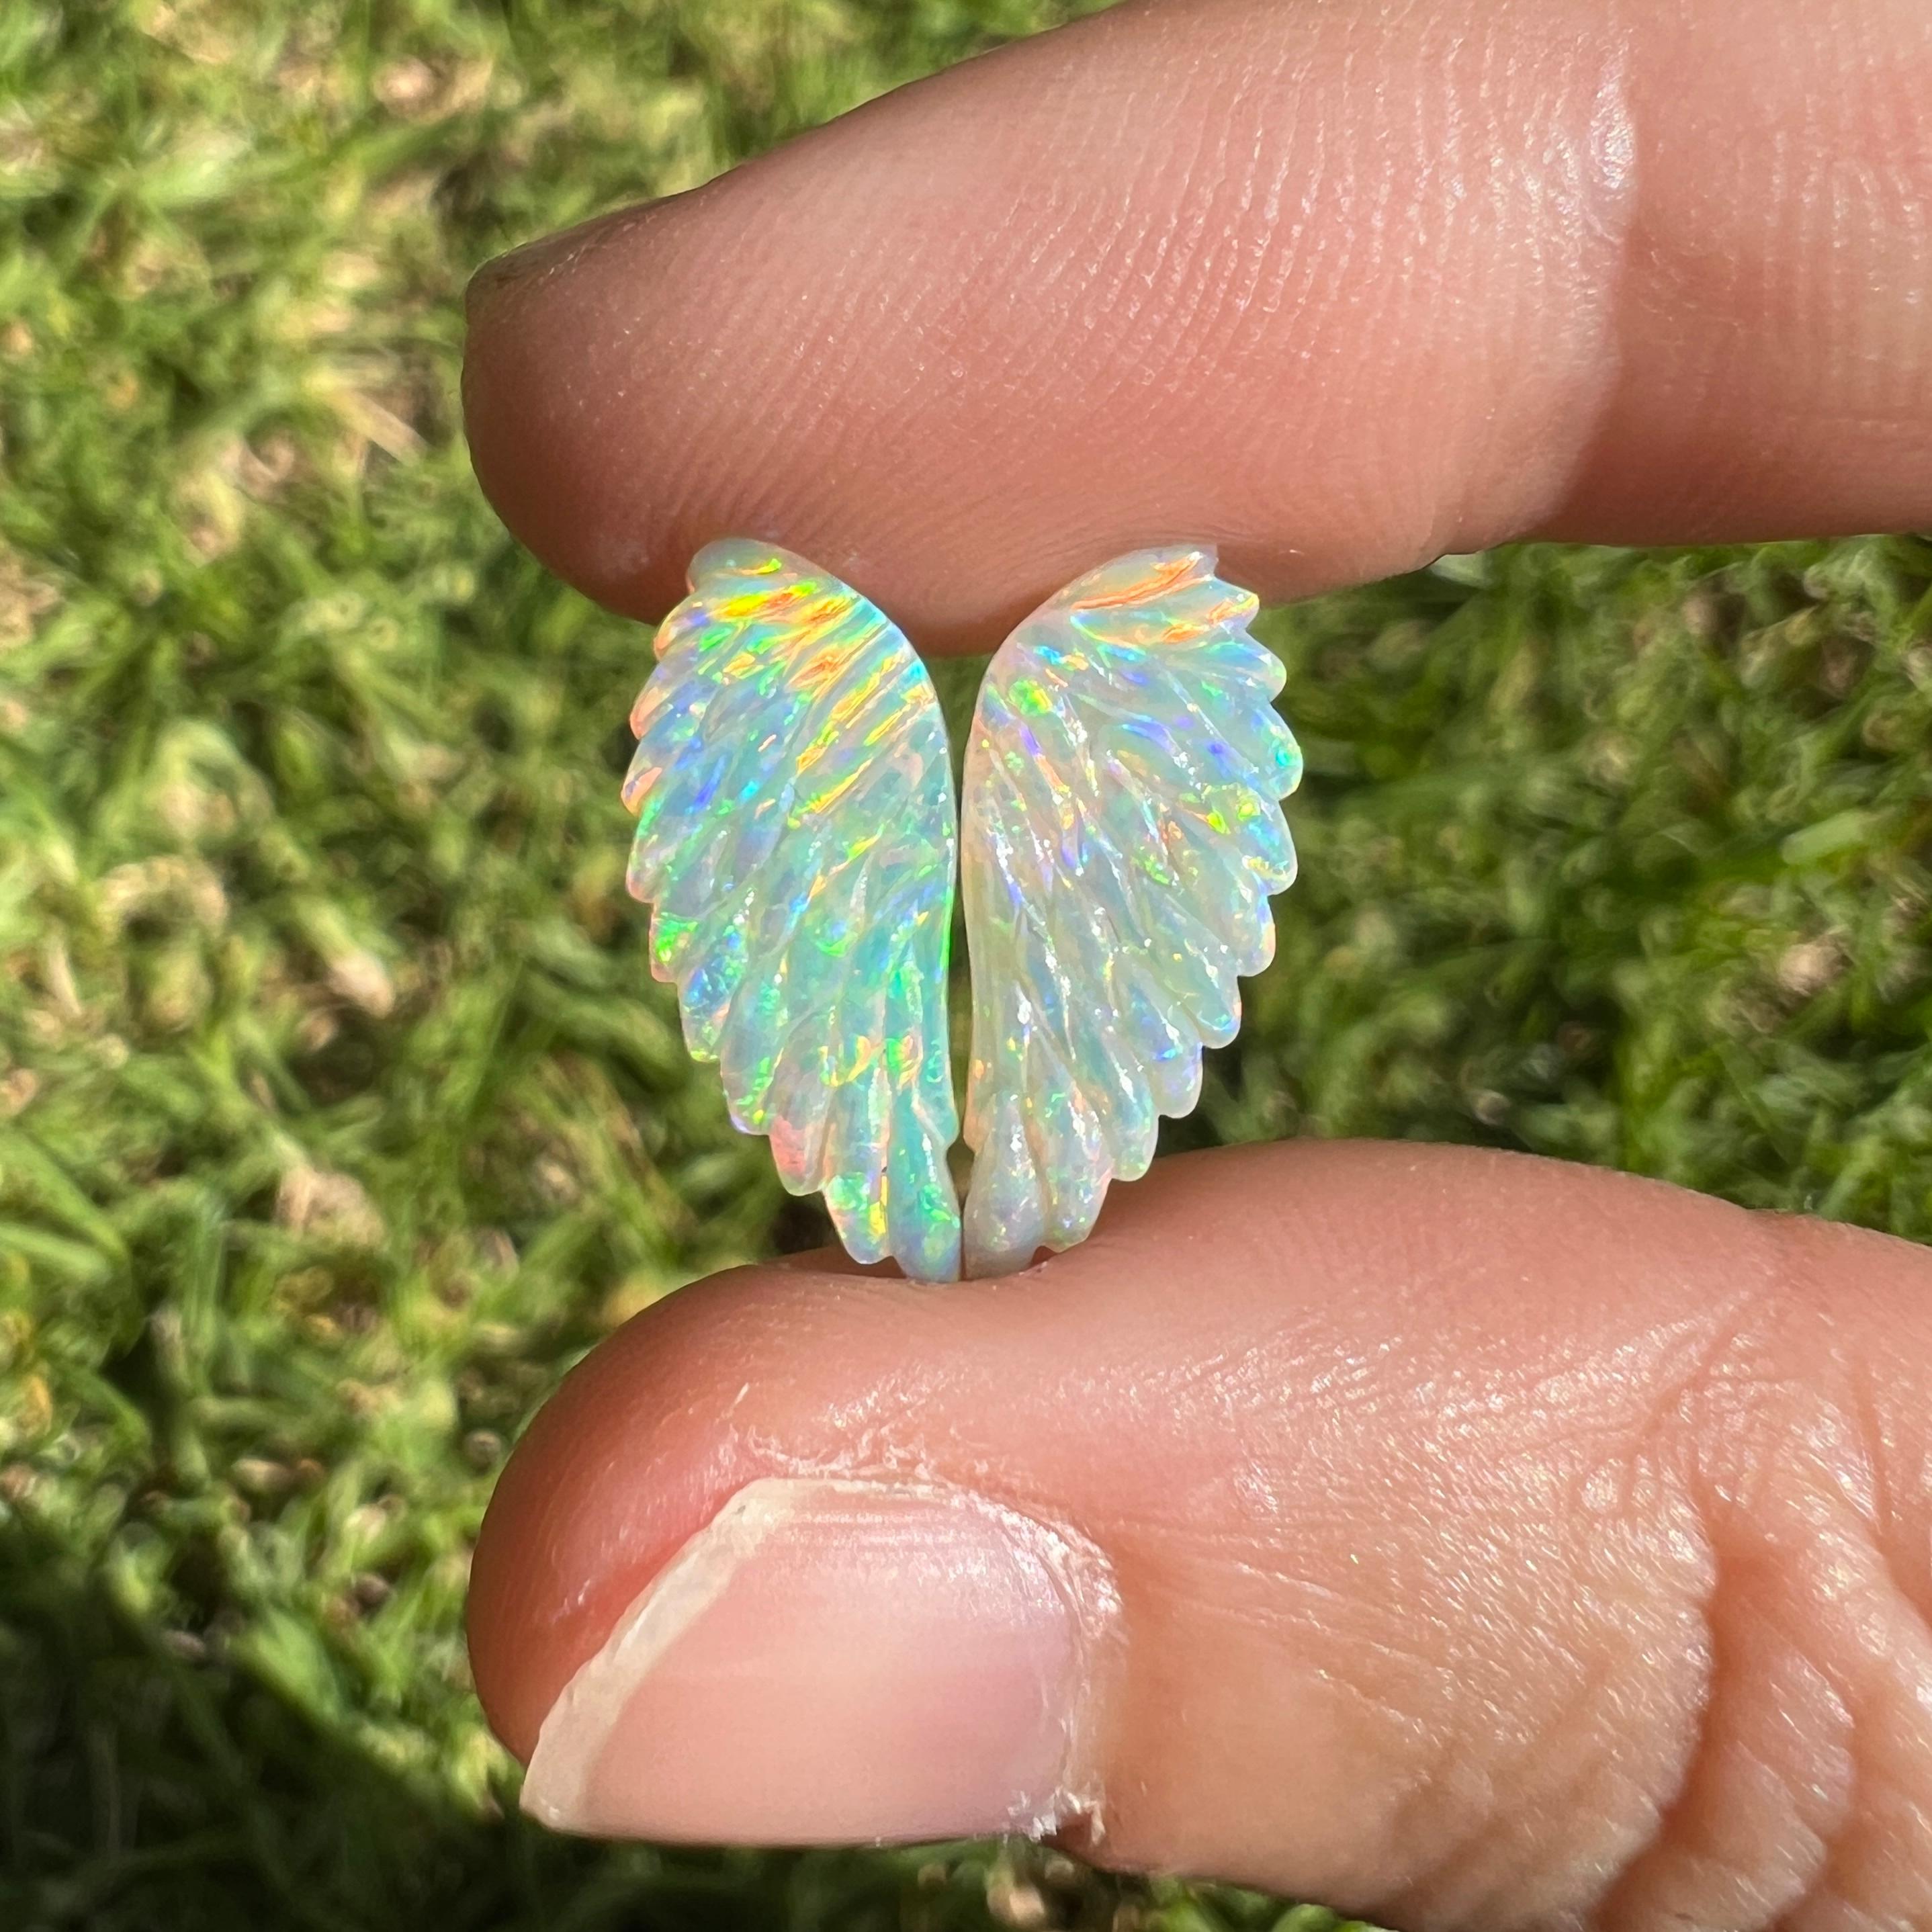 This 3.66 Ct natural Australian gem crystal opal, carved into a pair of angel wings, is a truly exceptional addition to any collection, mined by Sue Cooper herself. Its rarity, coupled with the amazing winged carving, captivates connoisseurs with